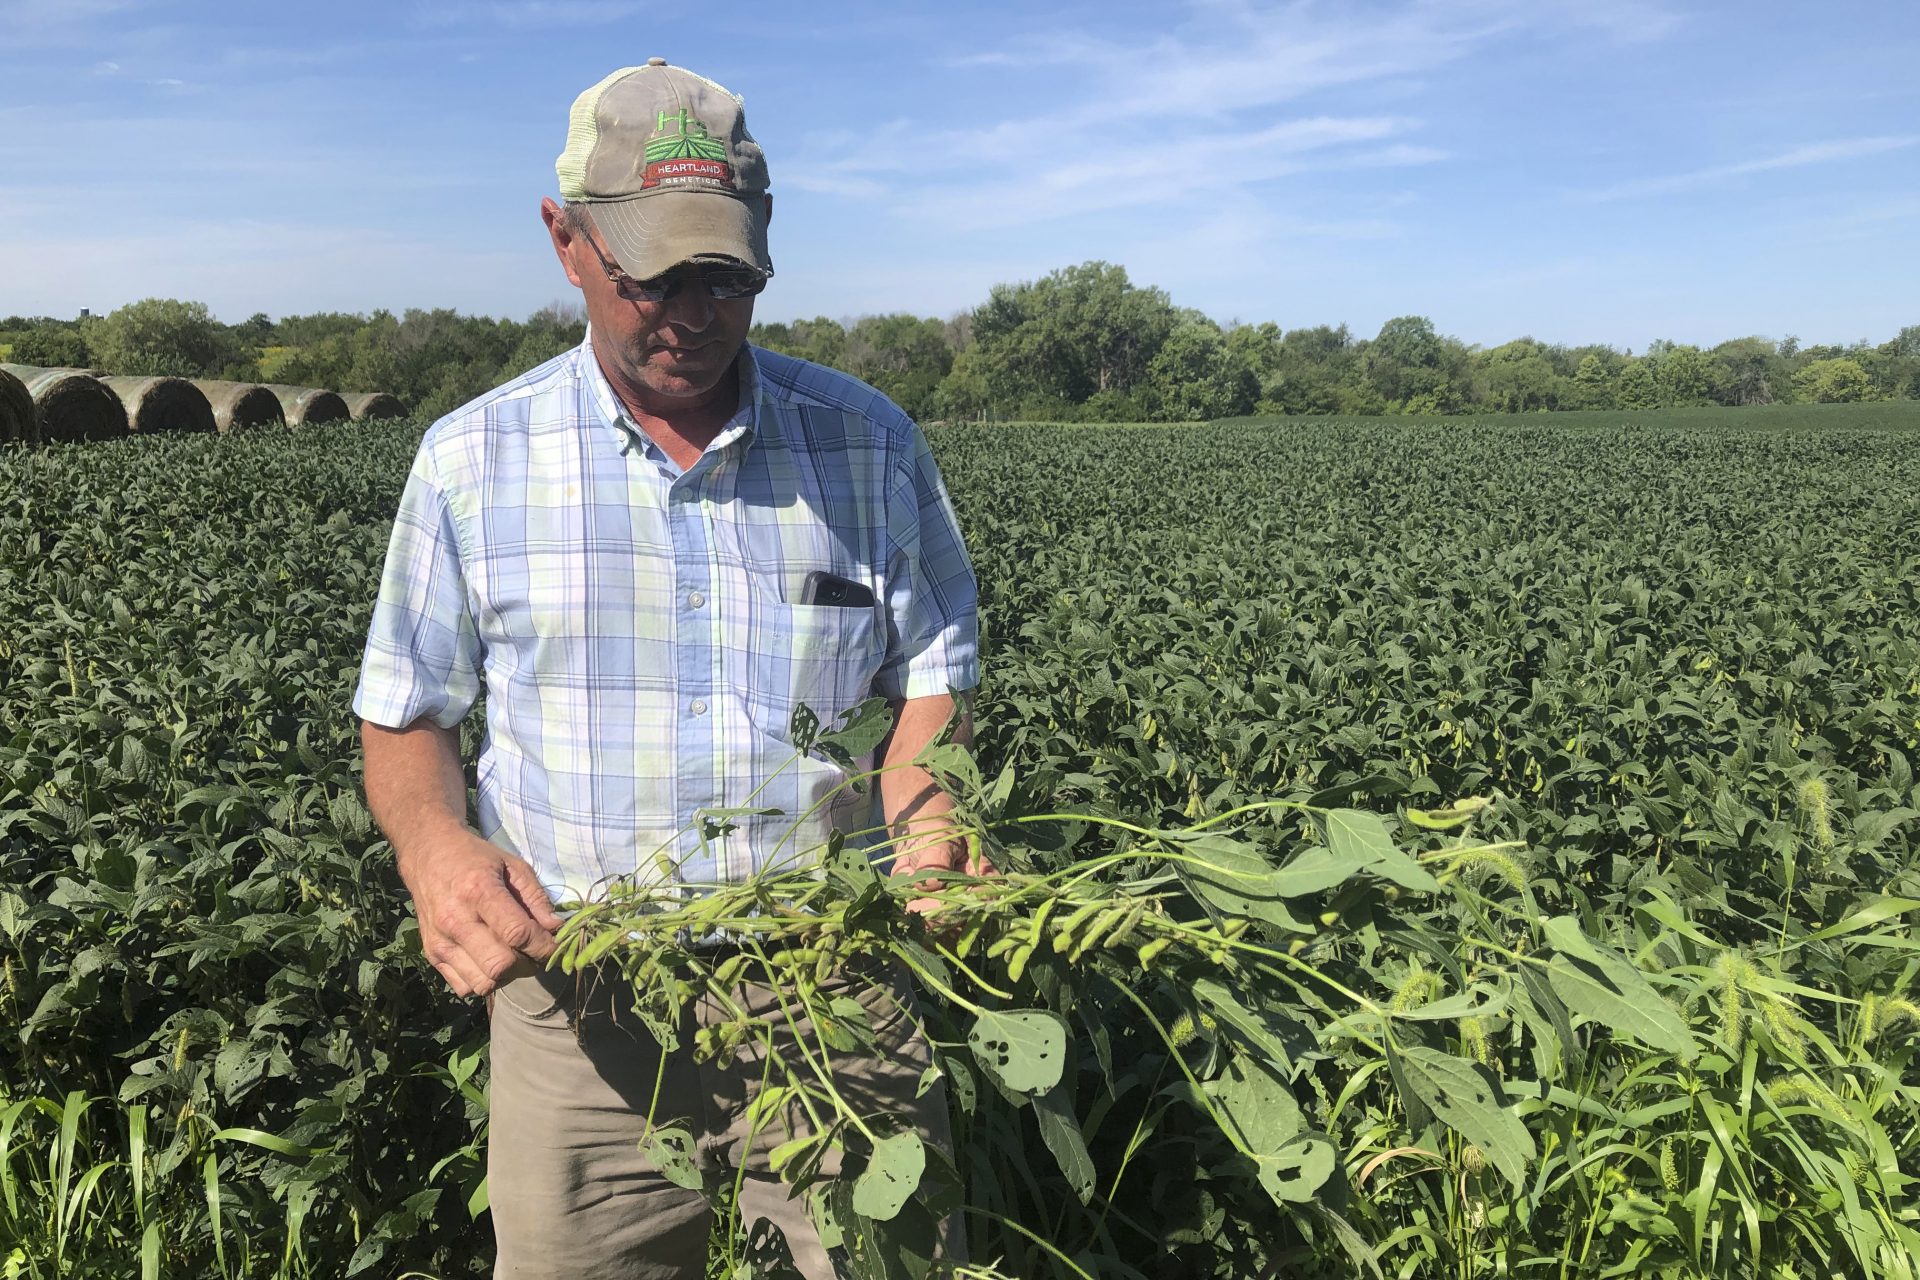 Farmer Randy Miller is shown with his soybeans, Thursday, Aug. 22, 2019, at his farm in Lacona, Iowa. Miller, who also farms corn, is among farmers unhappy with President Donald Trump over waivers granted to oil refineries that have sharply reduced demand for corn-based ethanol. Miller called it "our own country stabbing us in the back."